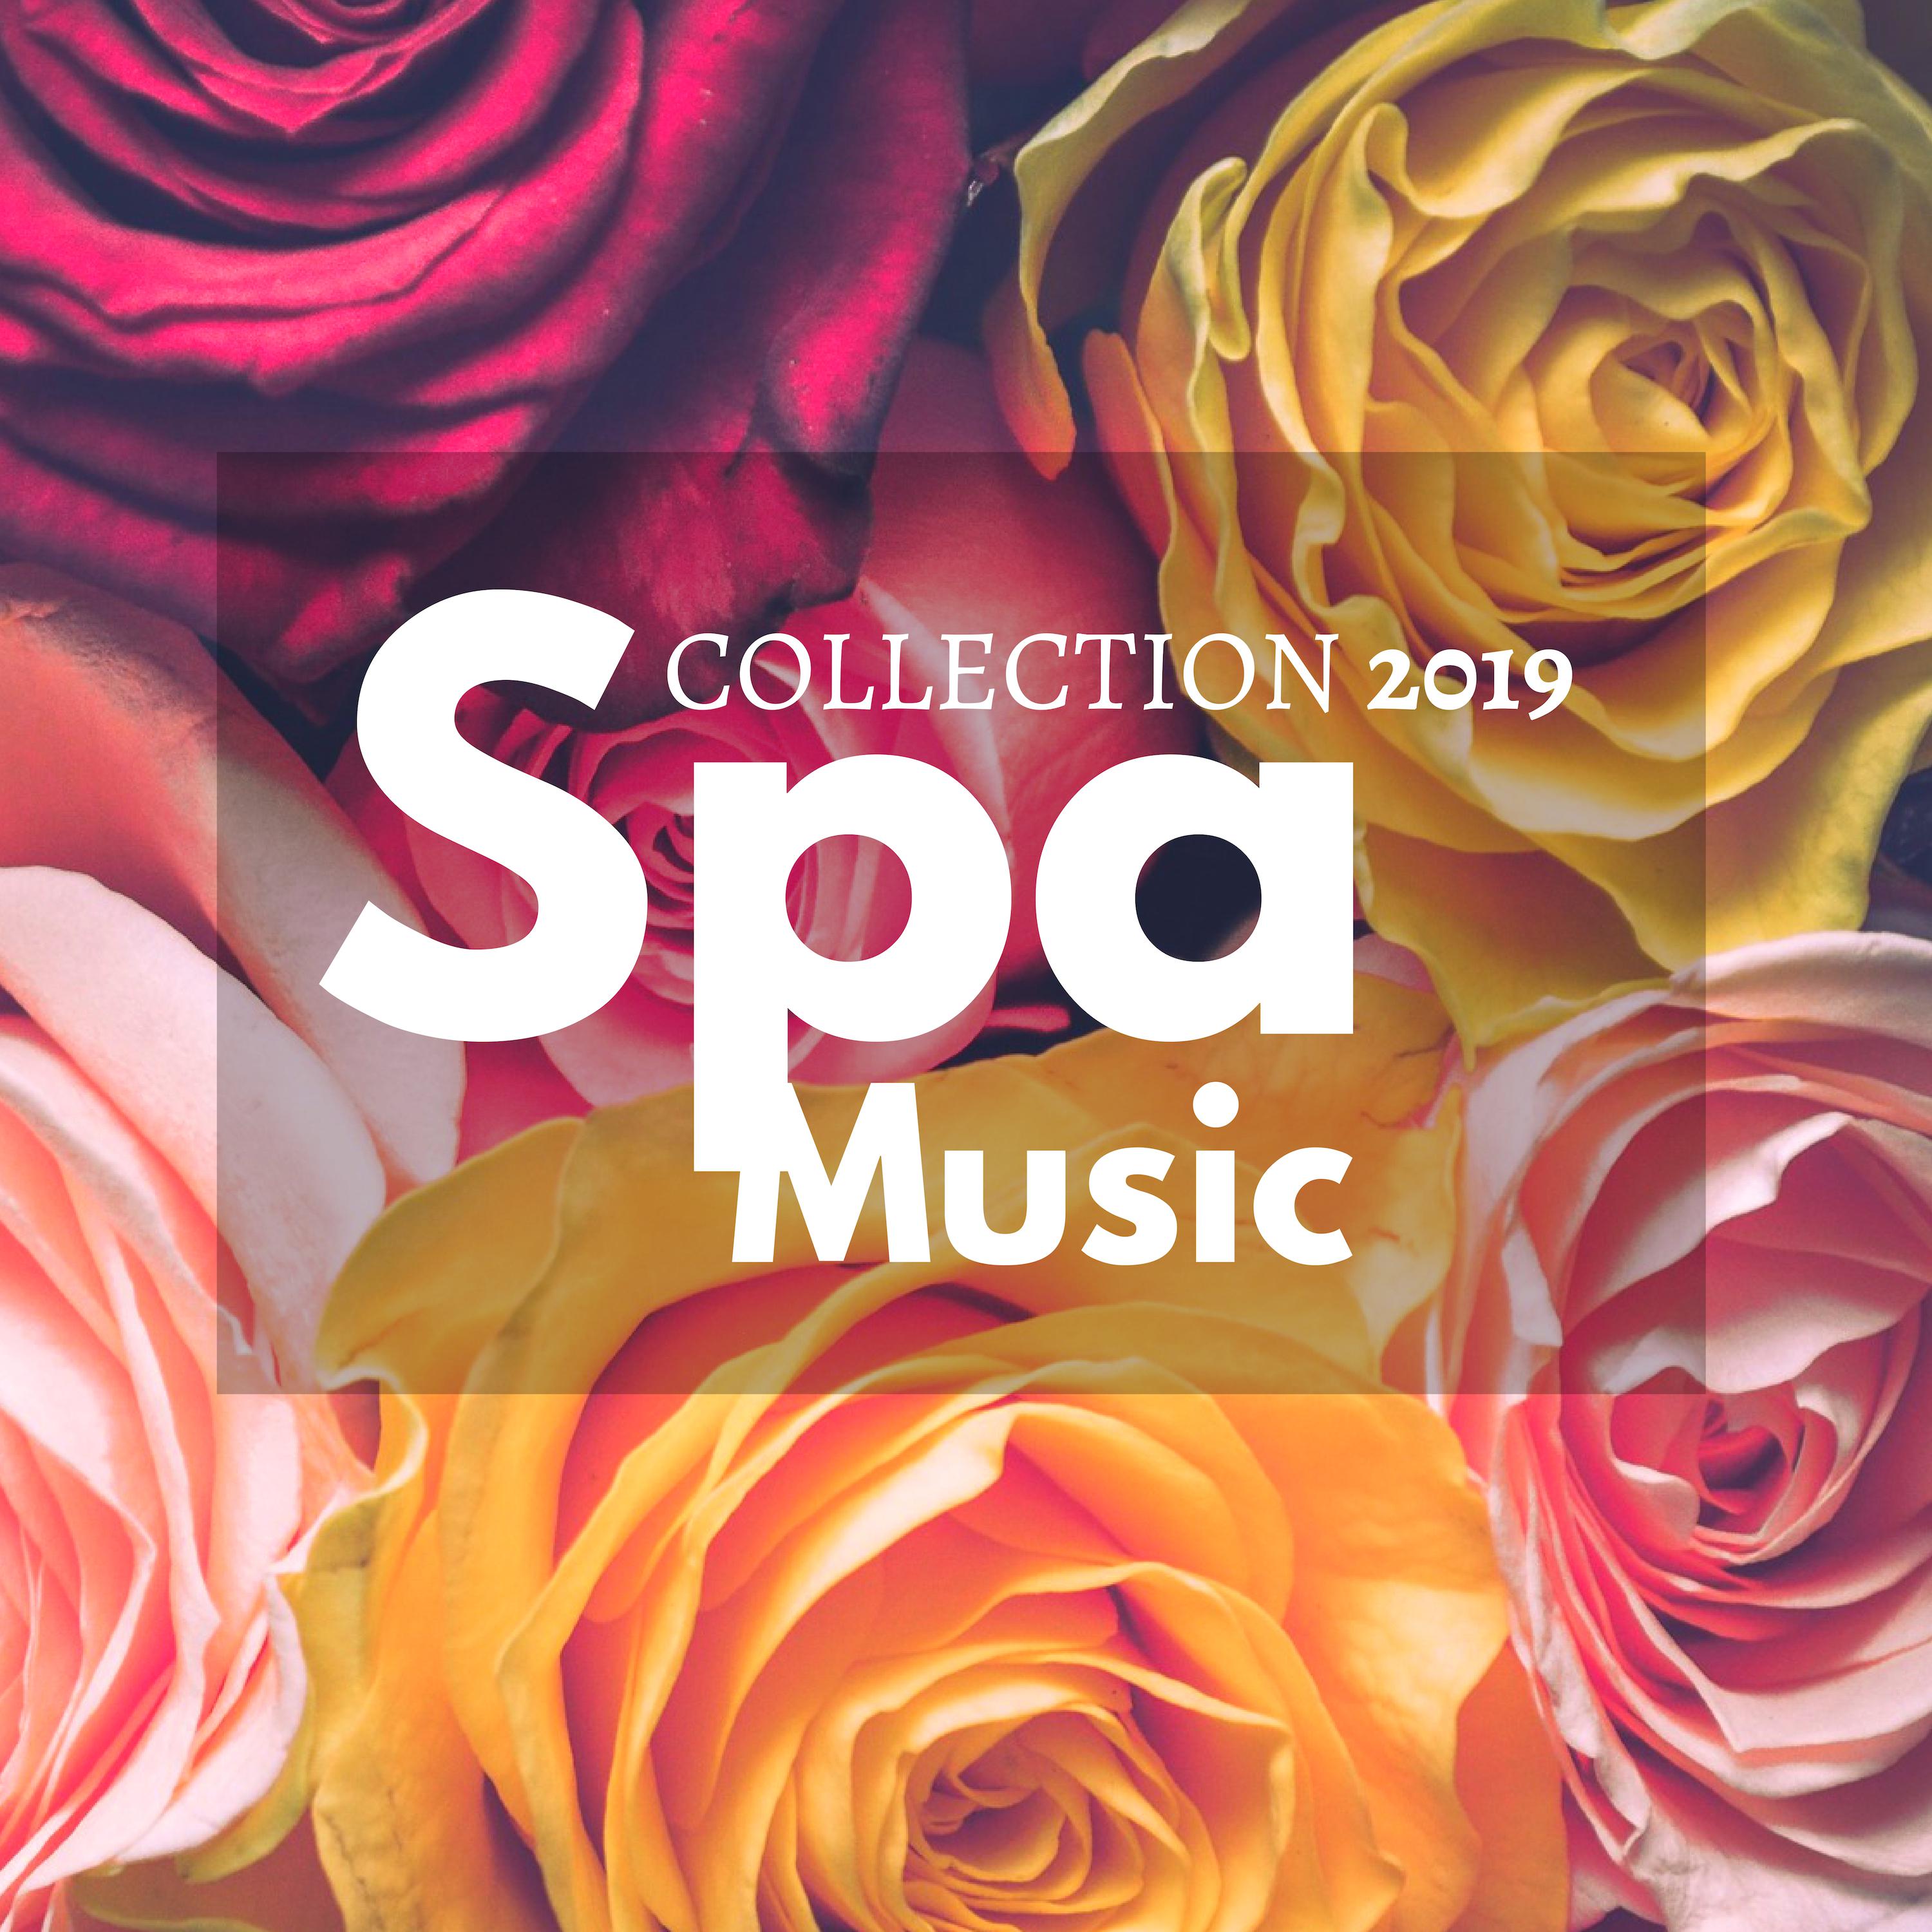 Spa Music Collection 2019: The Very Best in New Age Relaxing Music for Sauna, Massage, Yoga, Meditation and Wellness Centers